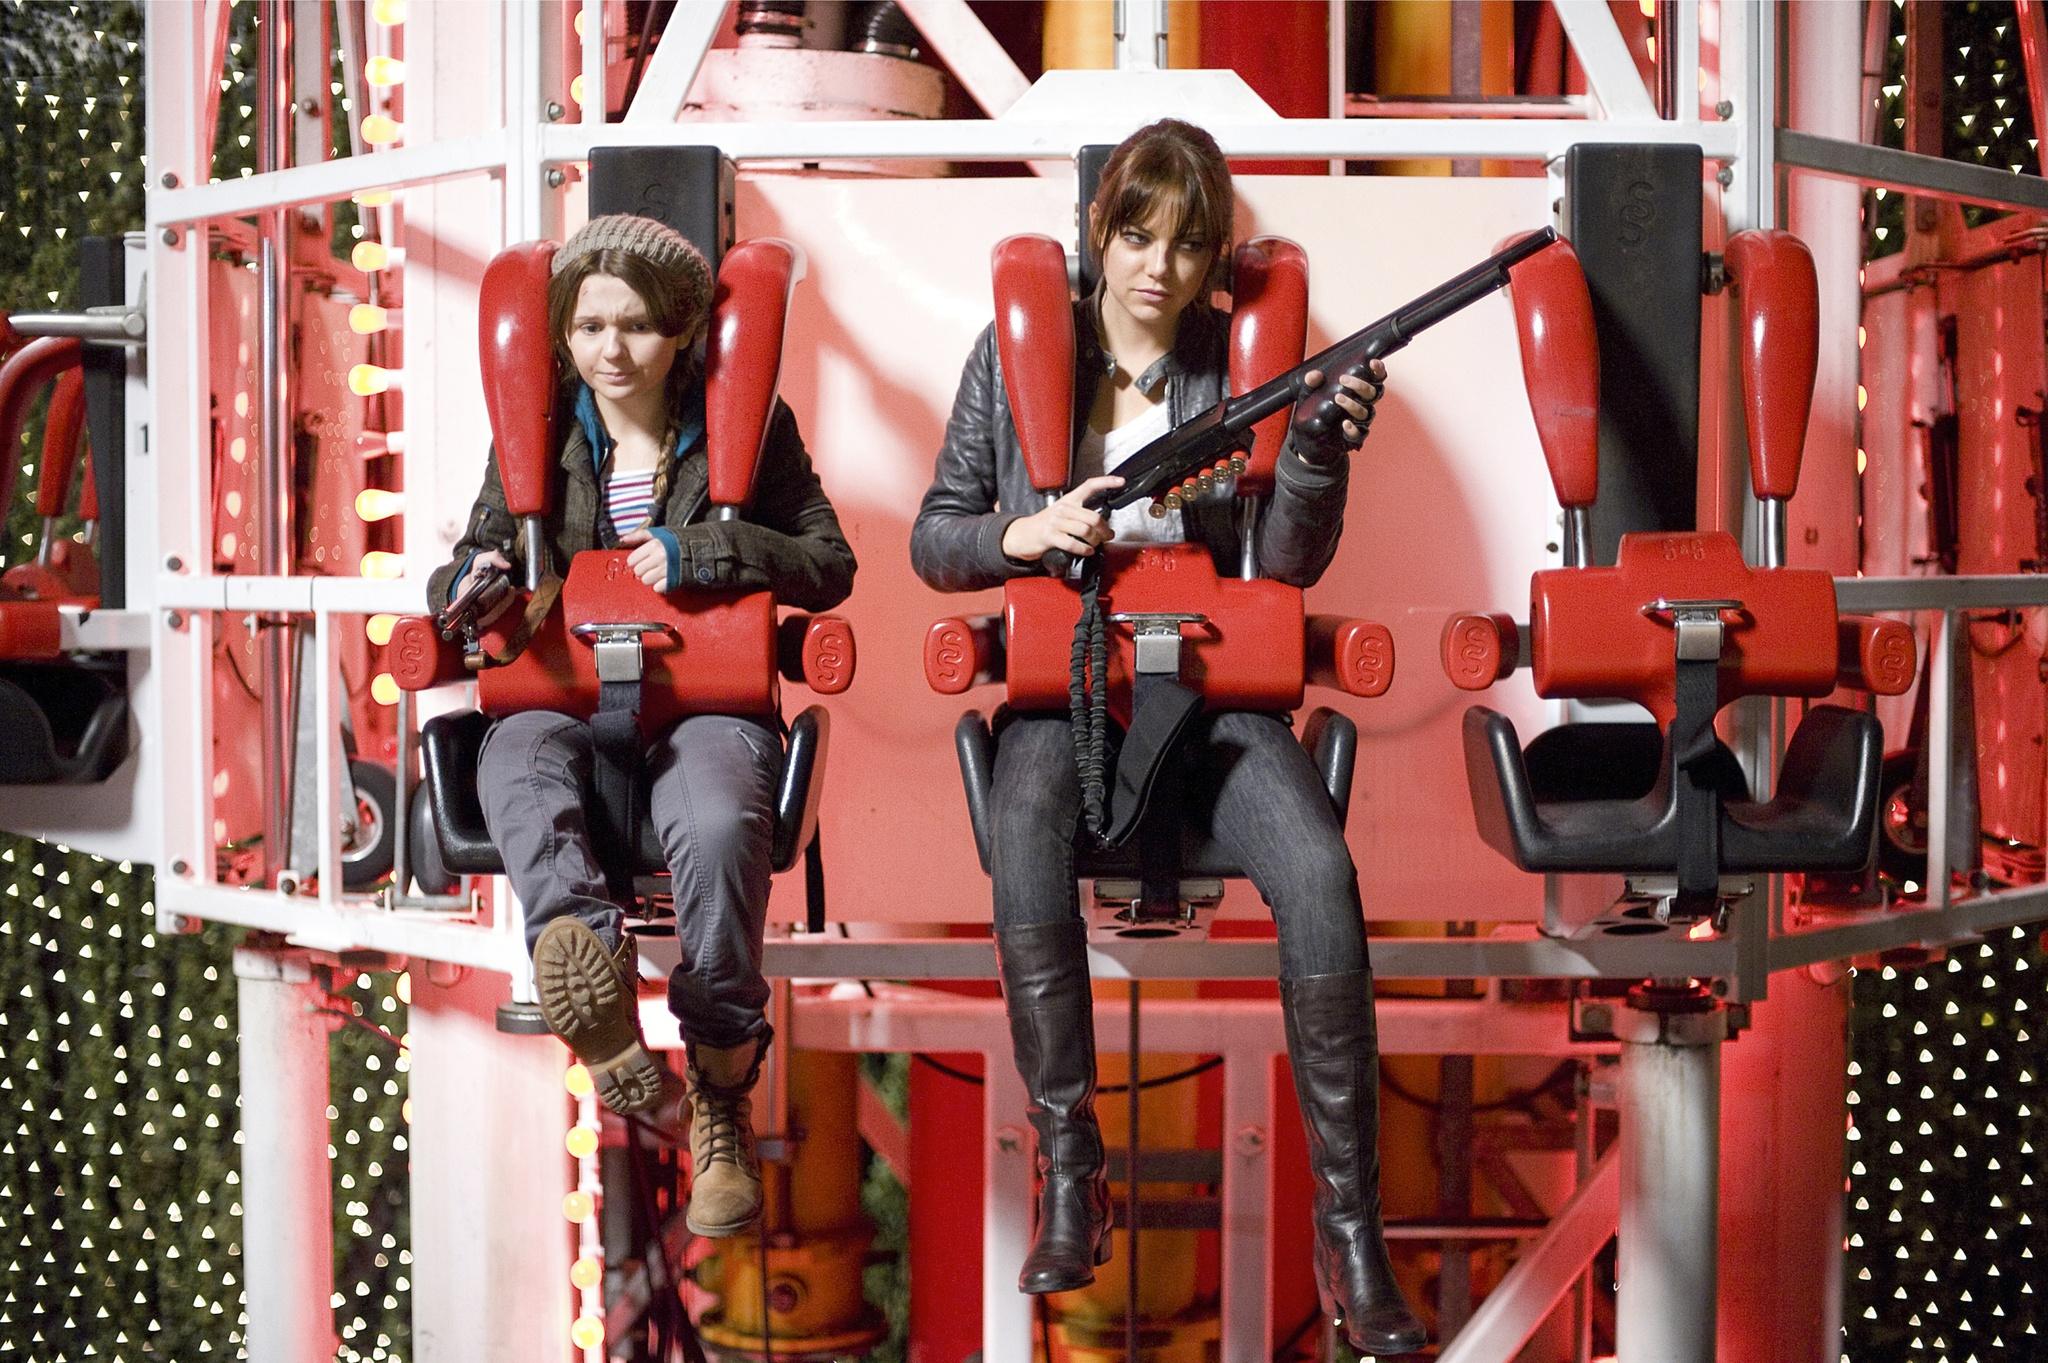 still-of-abigail-breslin-and-emma-stone-in-zombieland-large-picture.jpg